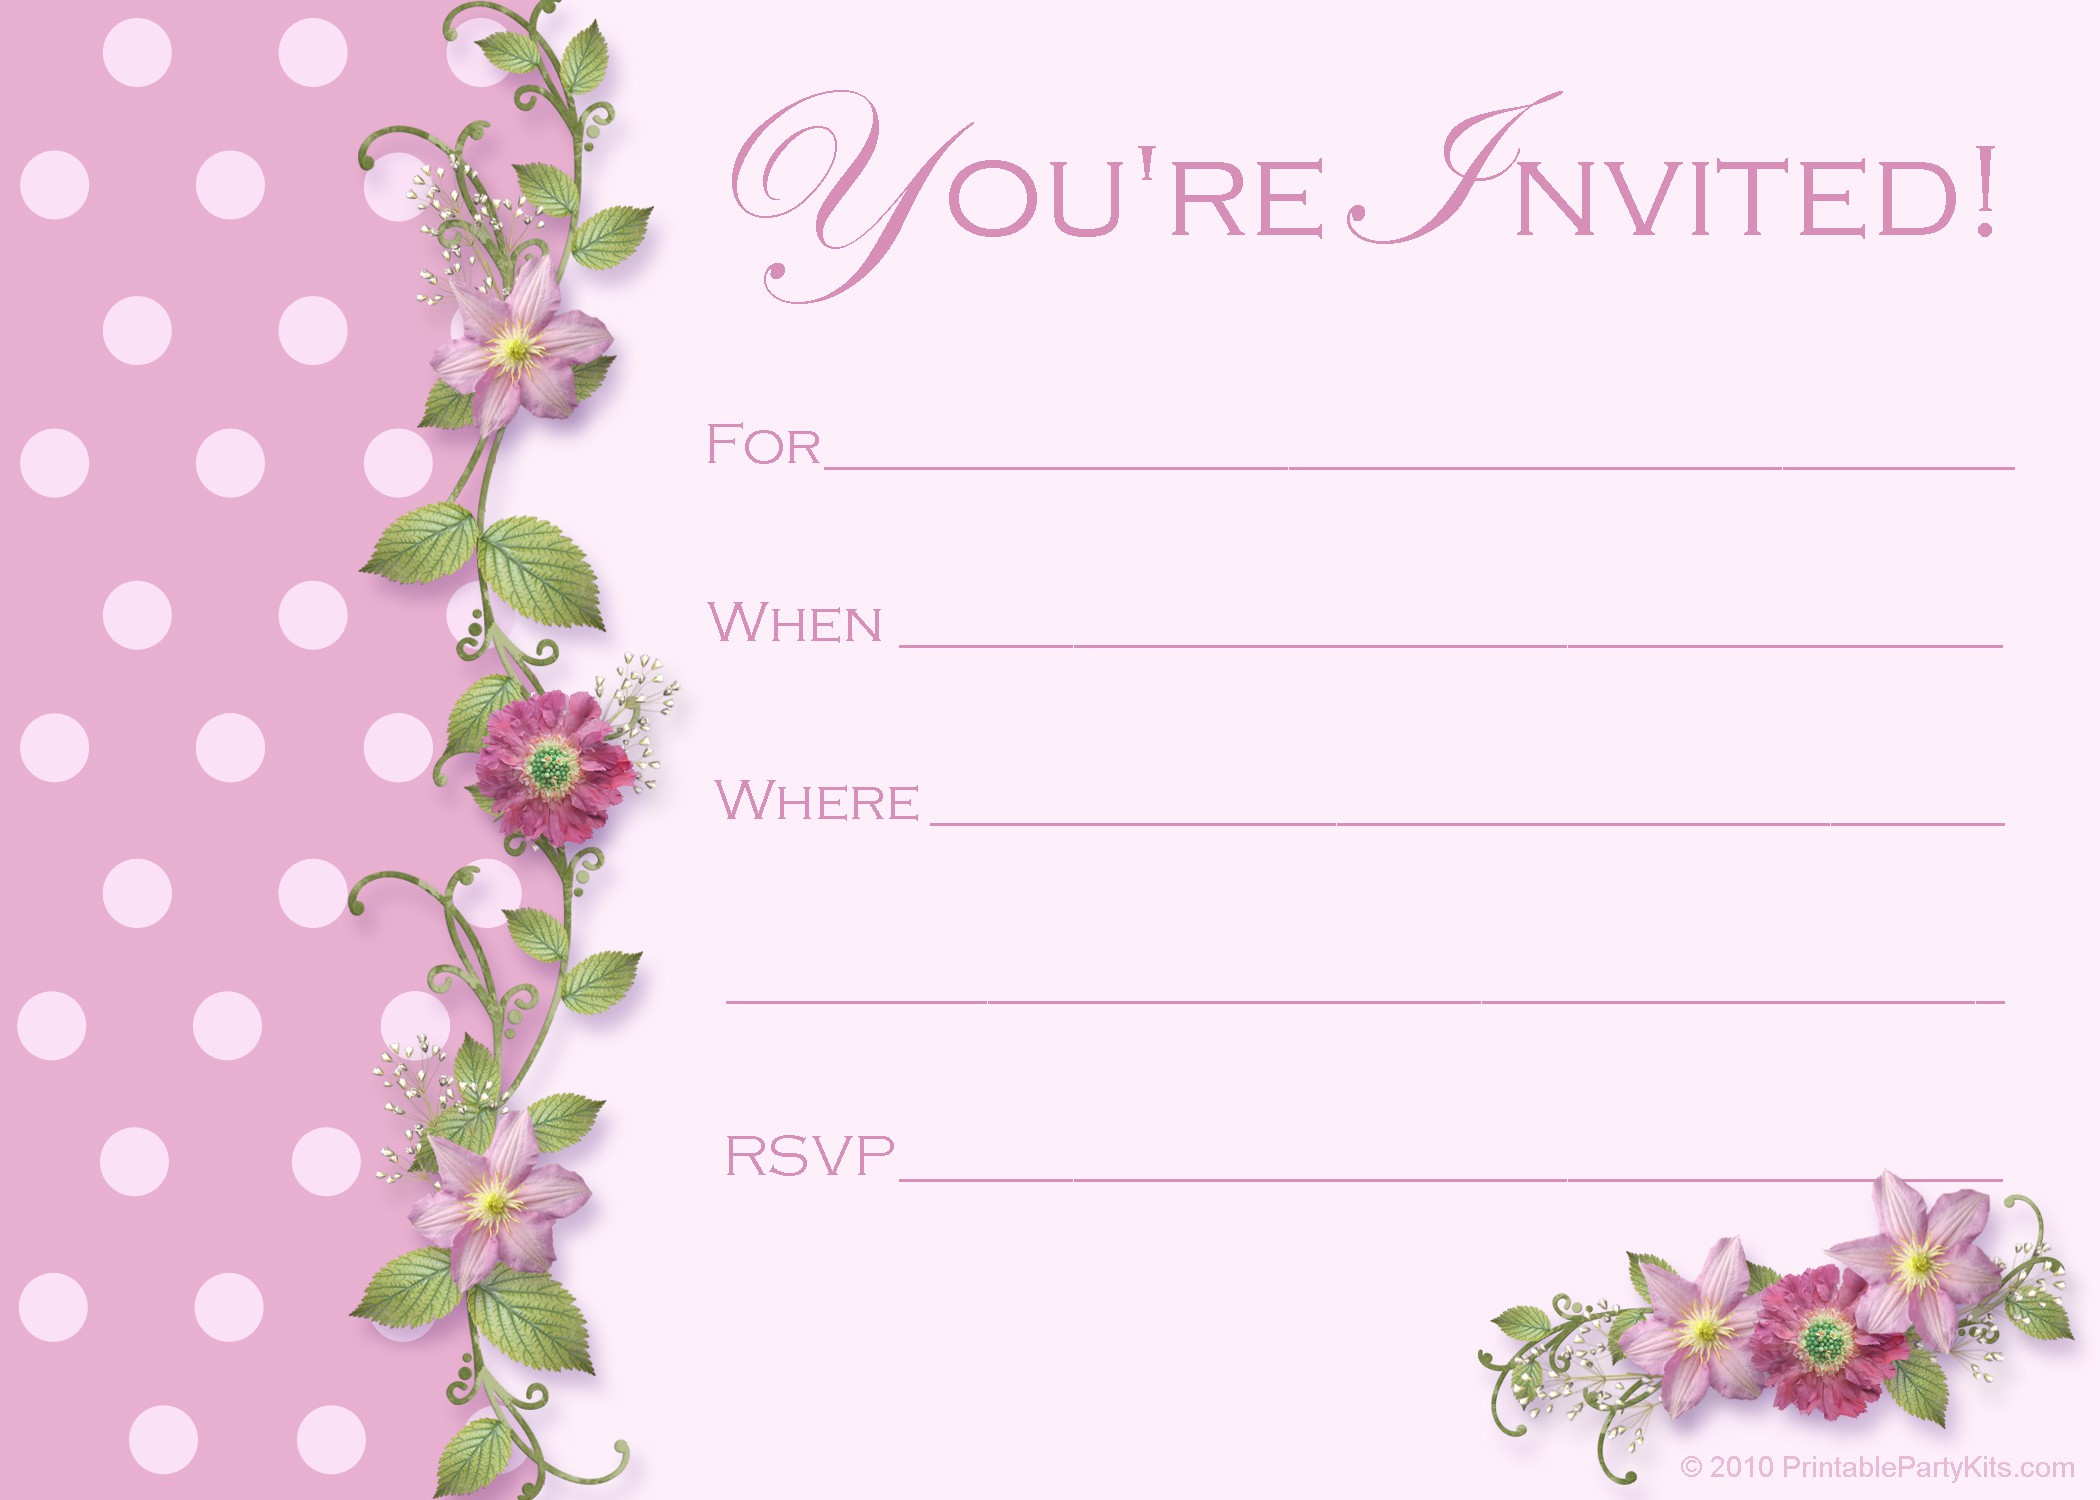 Quinceanera Invitations Templates For Free - Yourweek #547Dddeca25E - Free Printable Quinceanera Invitations